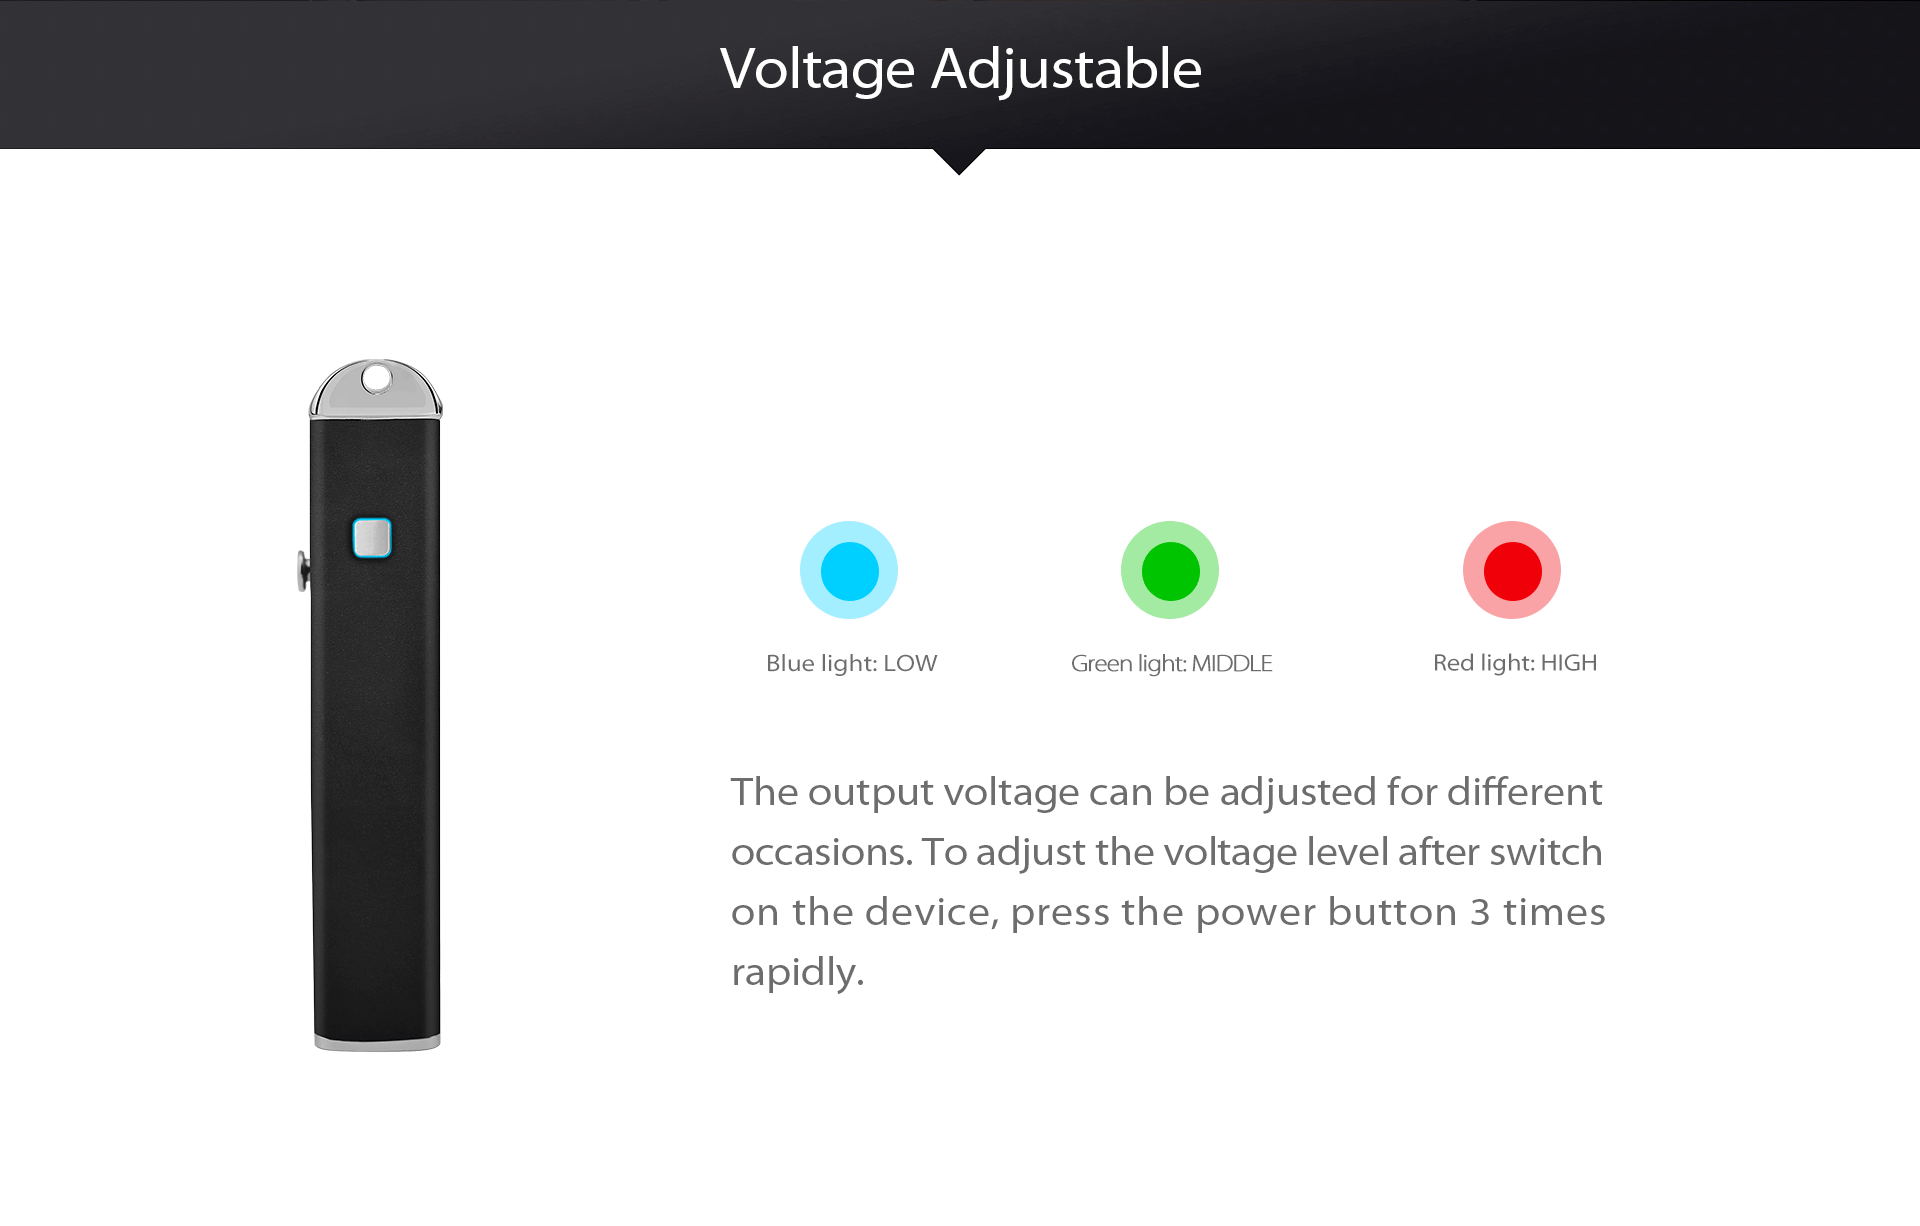 Yocan stealth output voltage can be adjusted for different occasions.